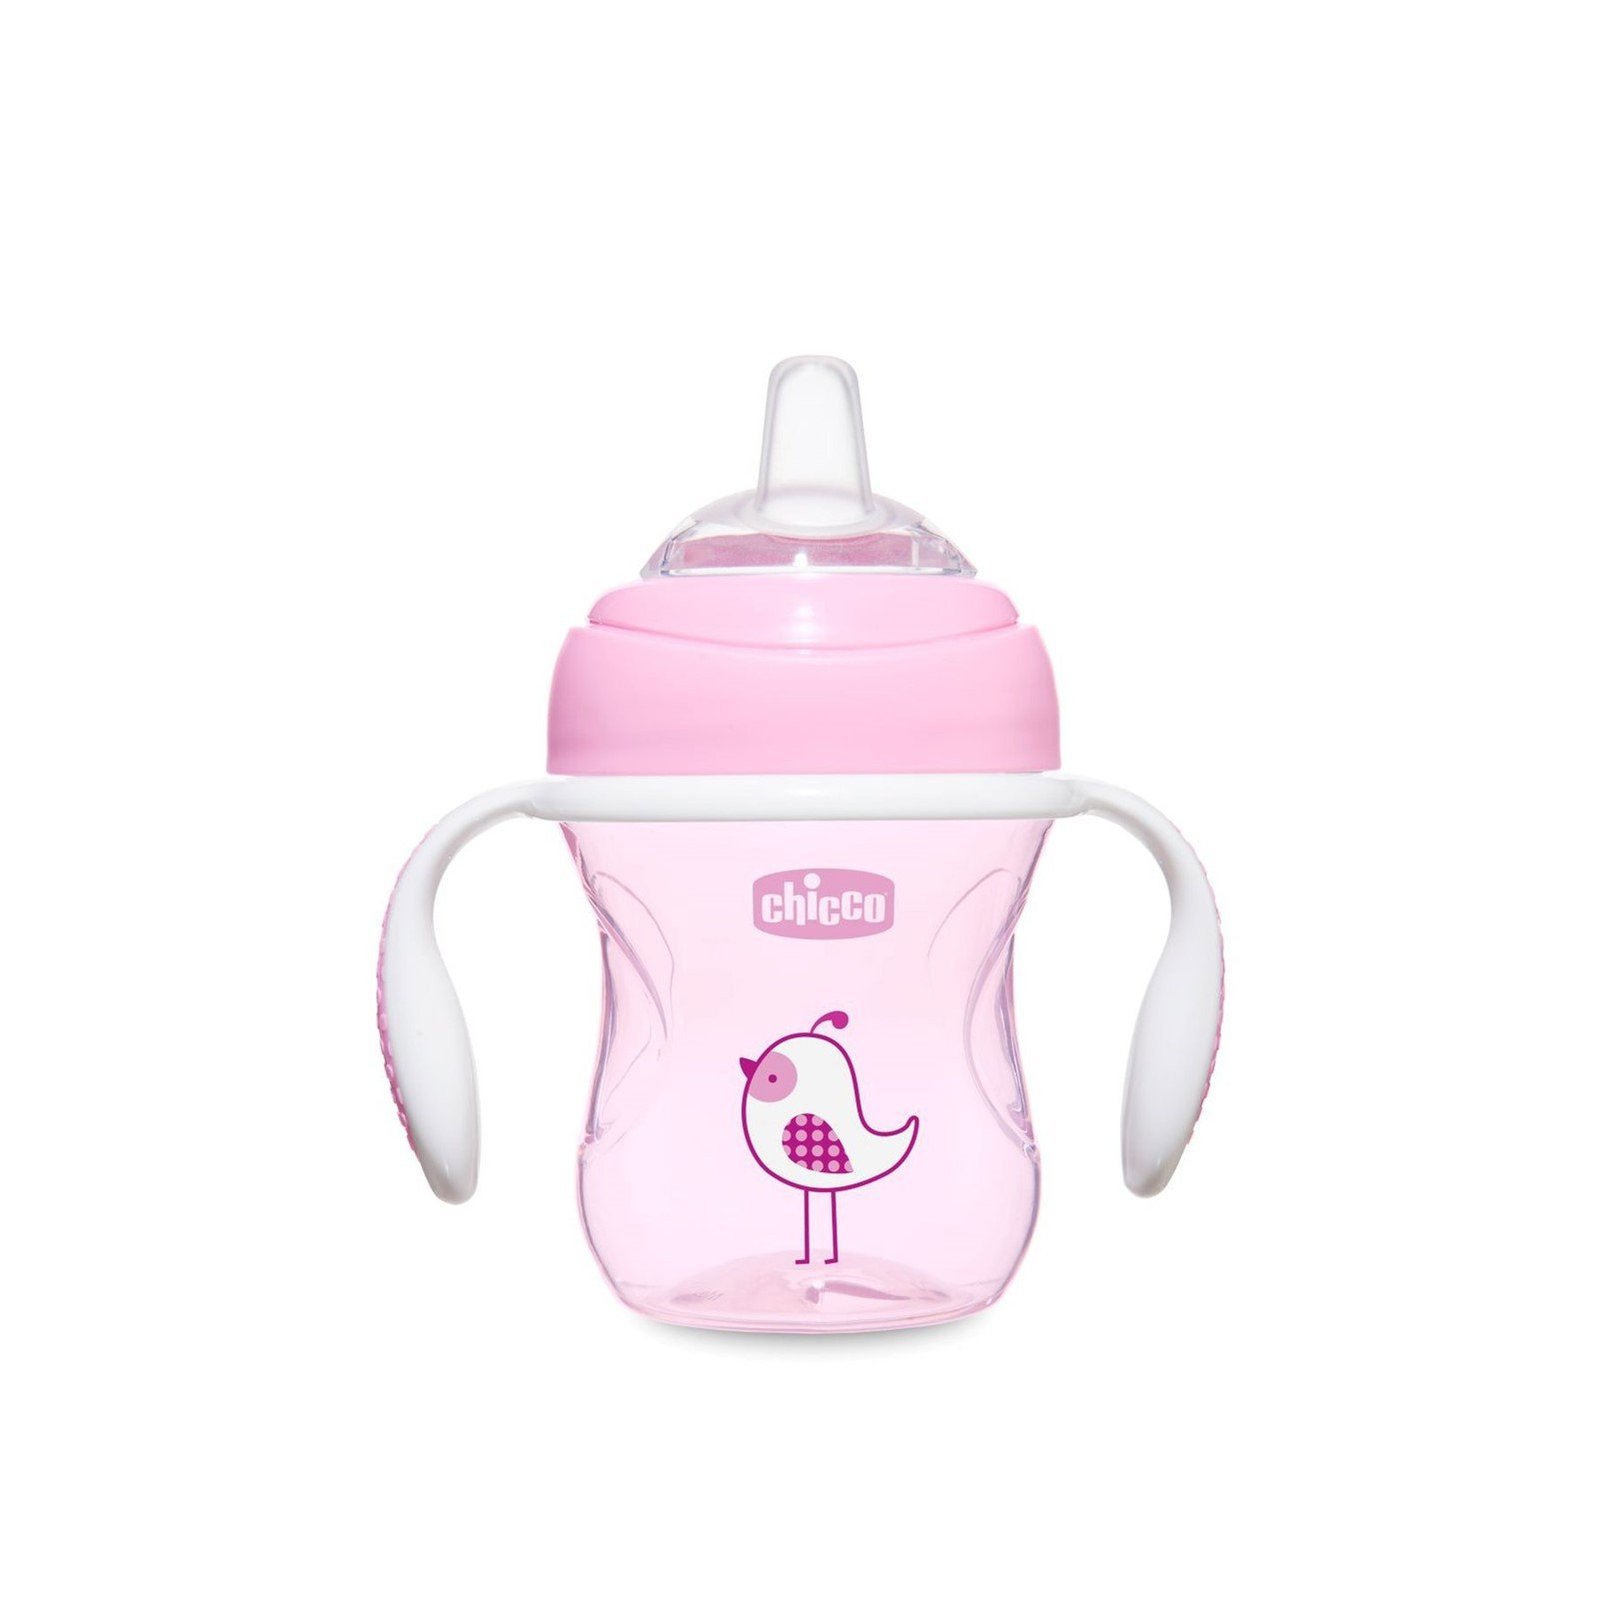 Chicco Mix & Match Transition Cup 4m+ Pink 200ml (7 fl oz)